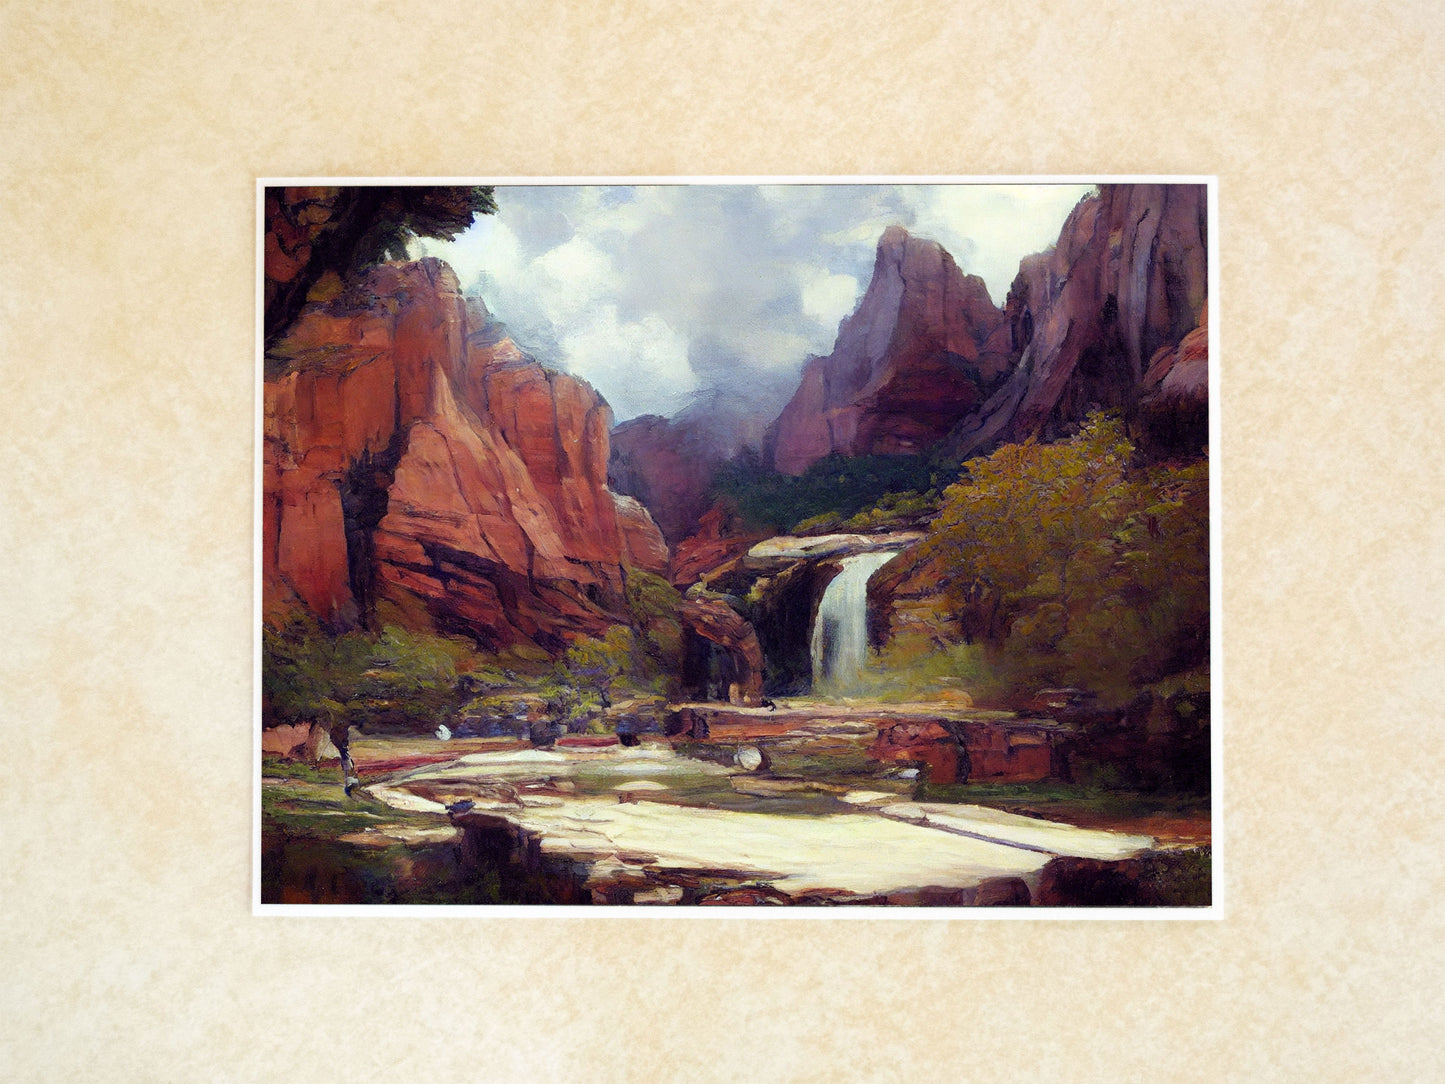 Zion National Park, Court of the Patriarchs